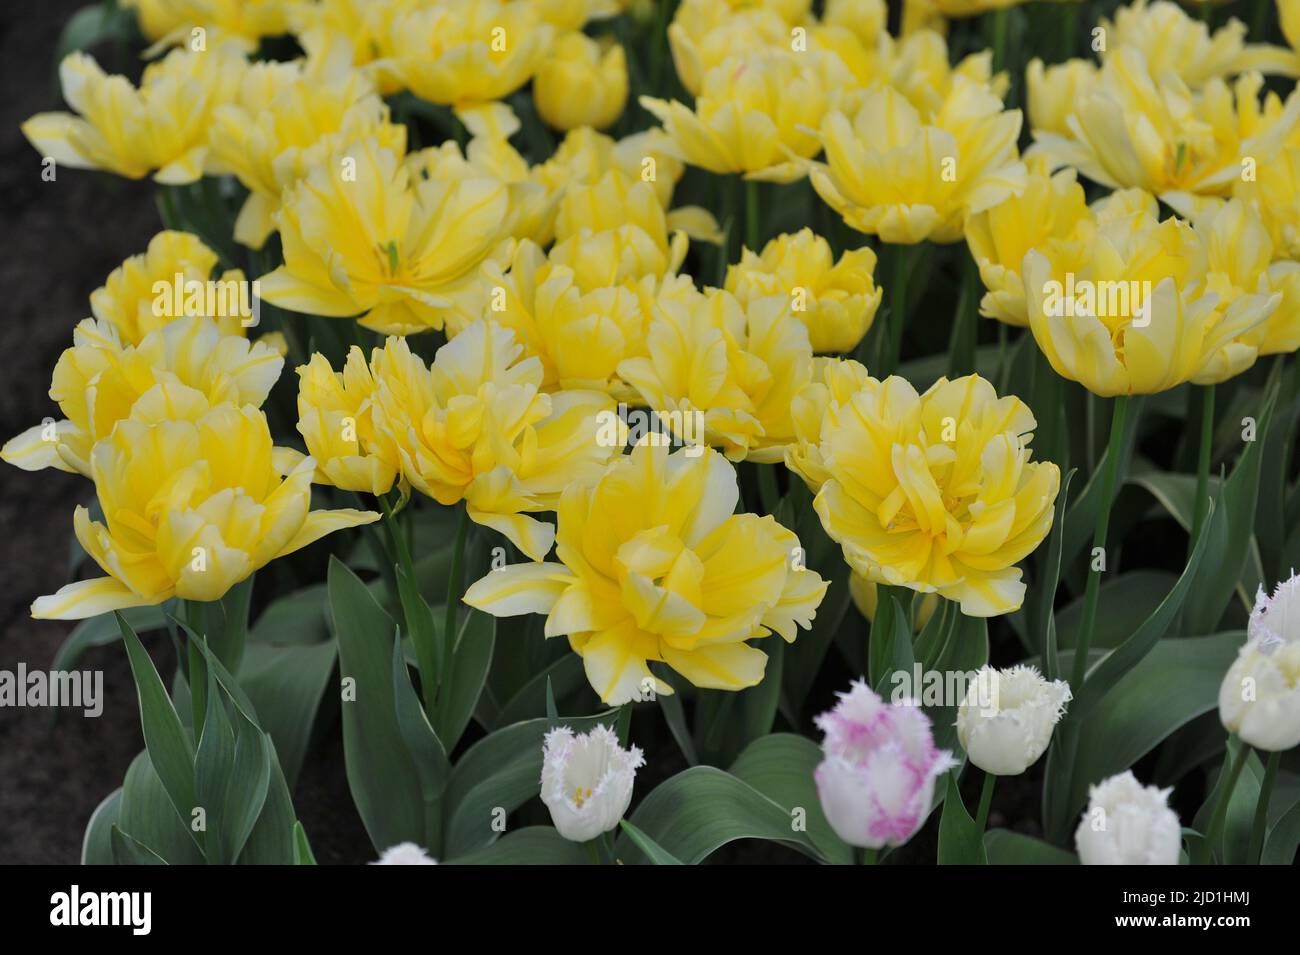 Yellow Double Early tulips (Tulipa) No Risk with variegated leaves bloom in a garden in March Stock Photo